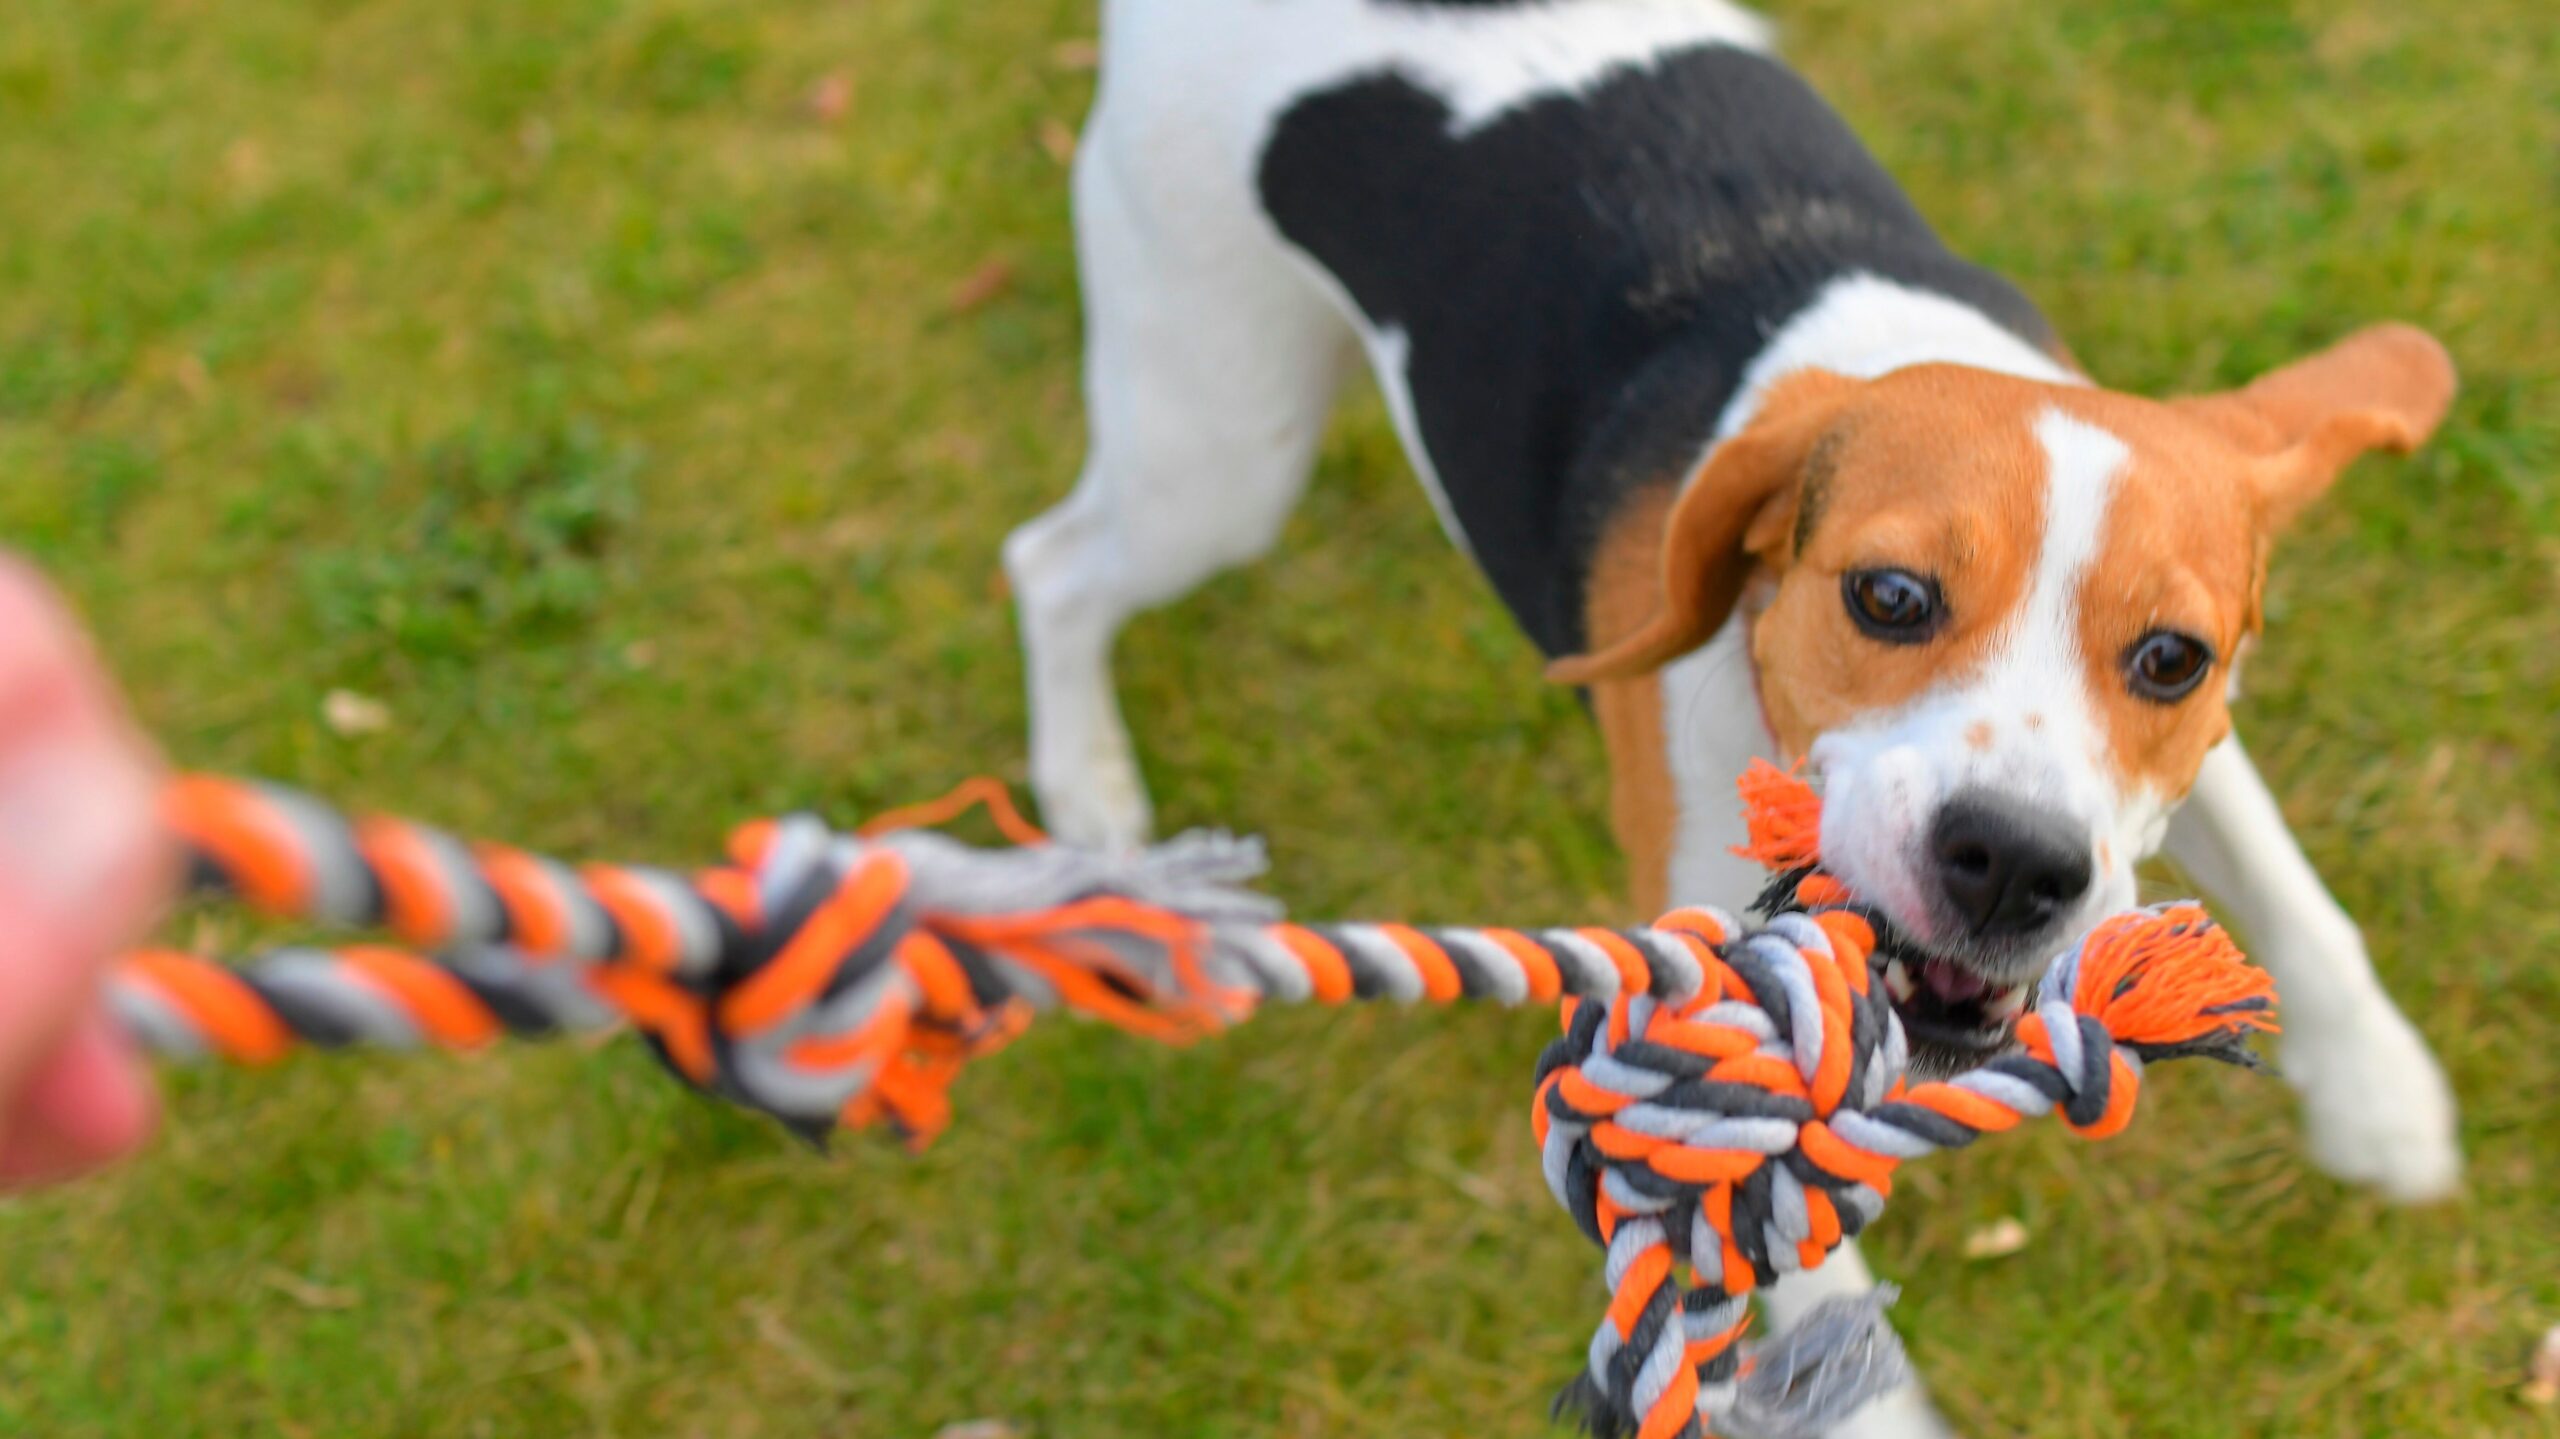 Check out rope and tugging dog toys at chewy.com